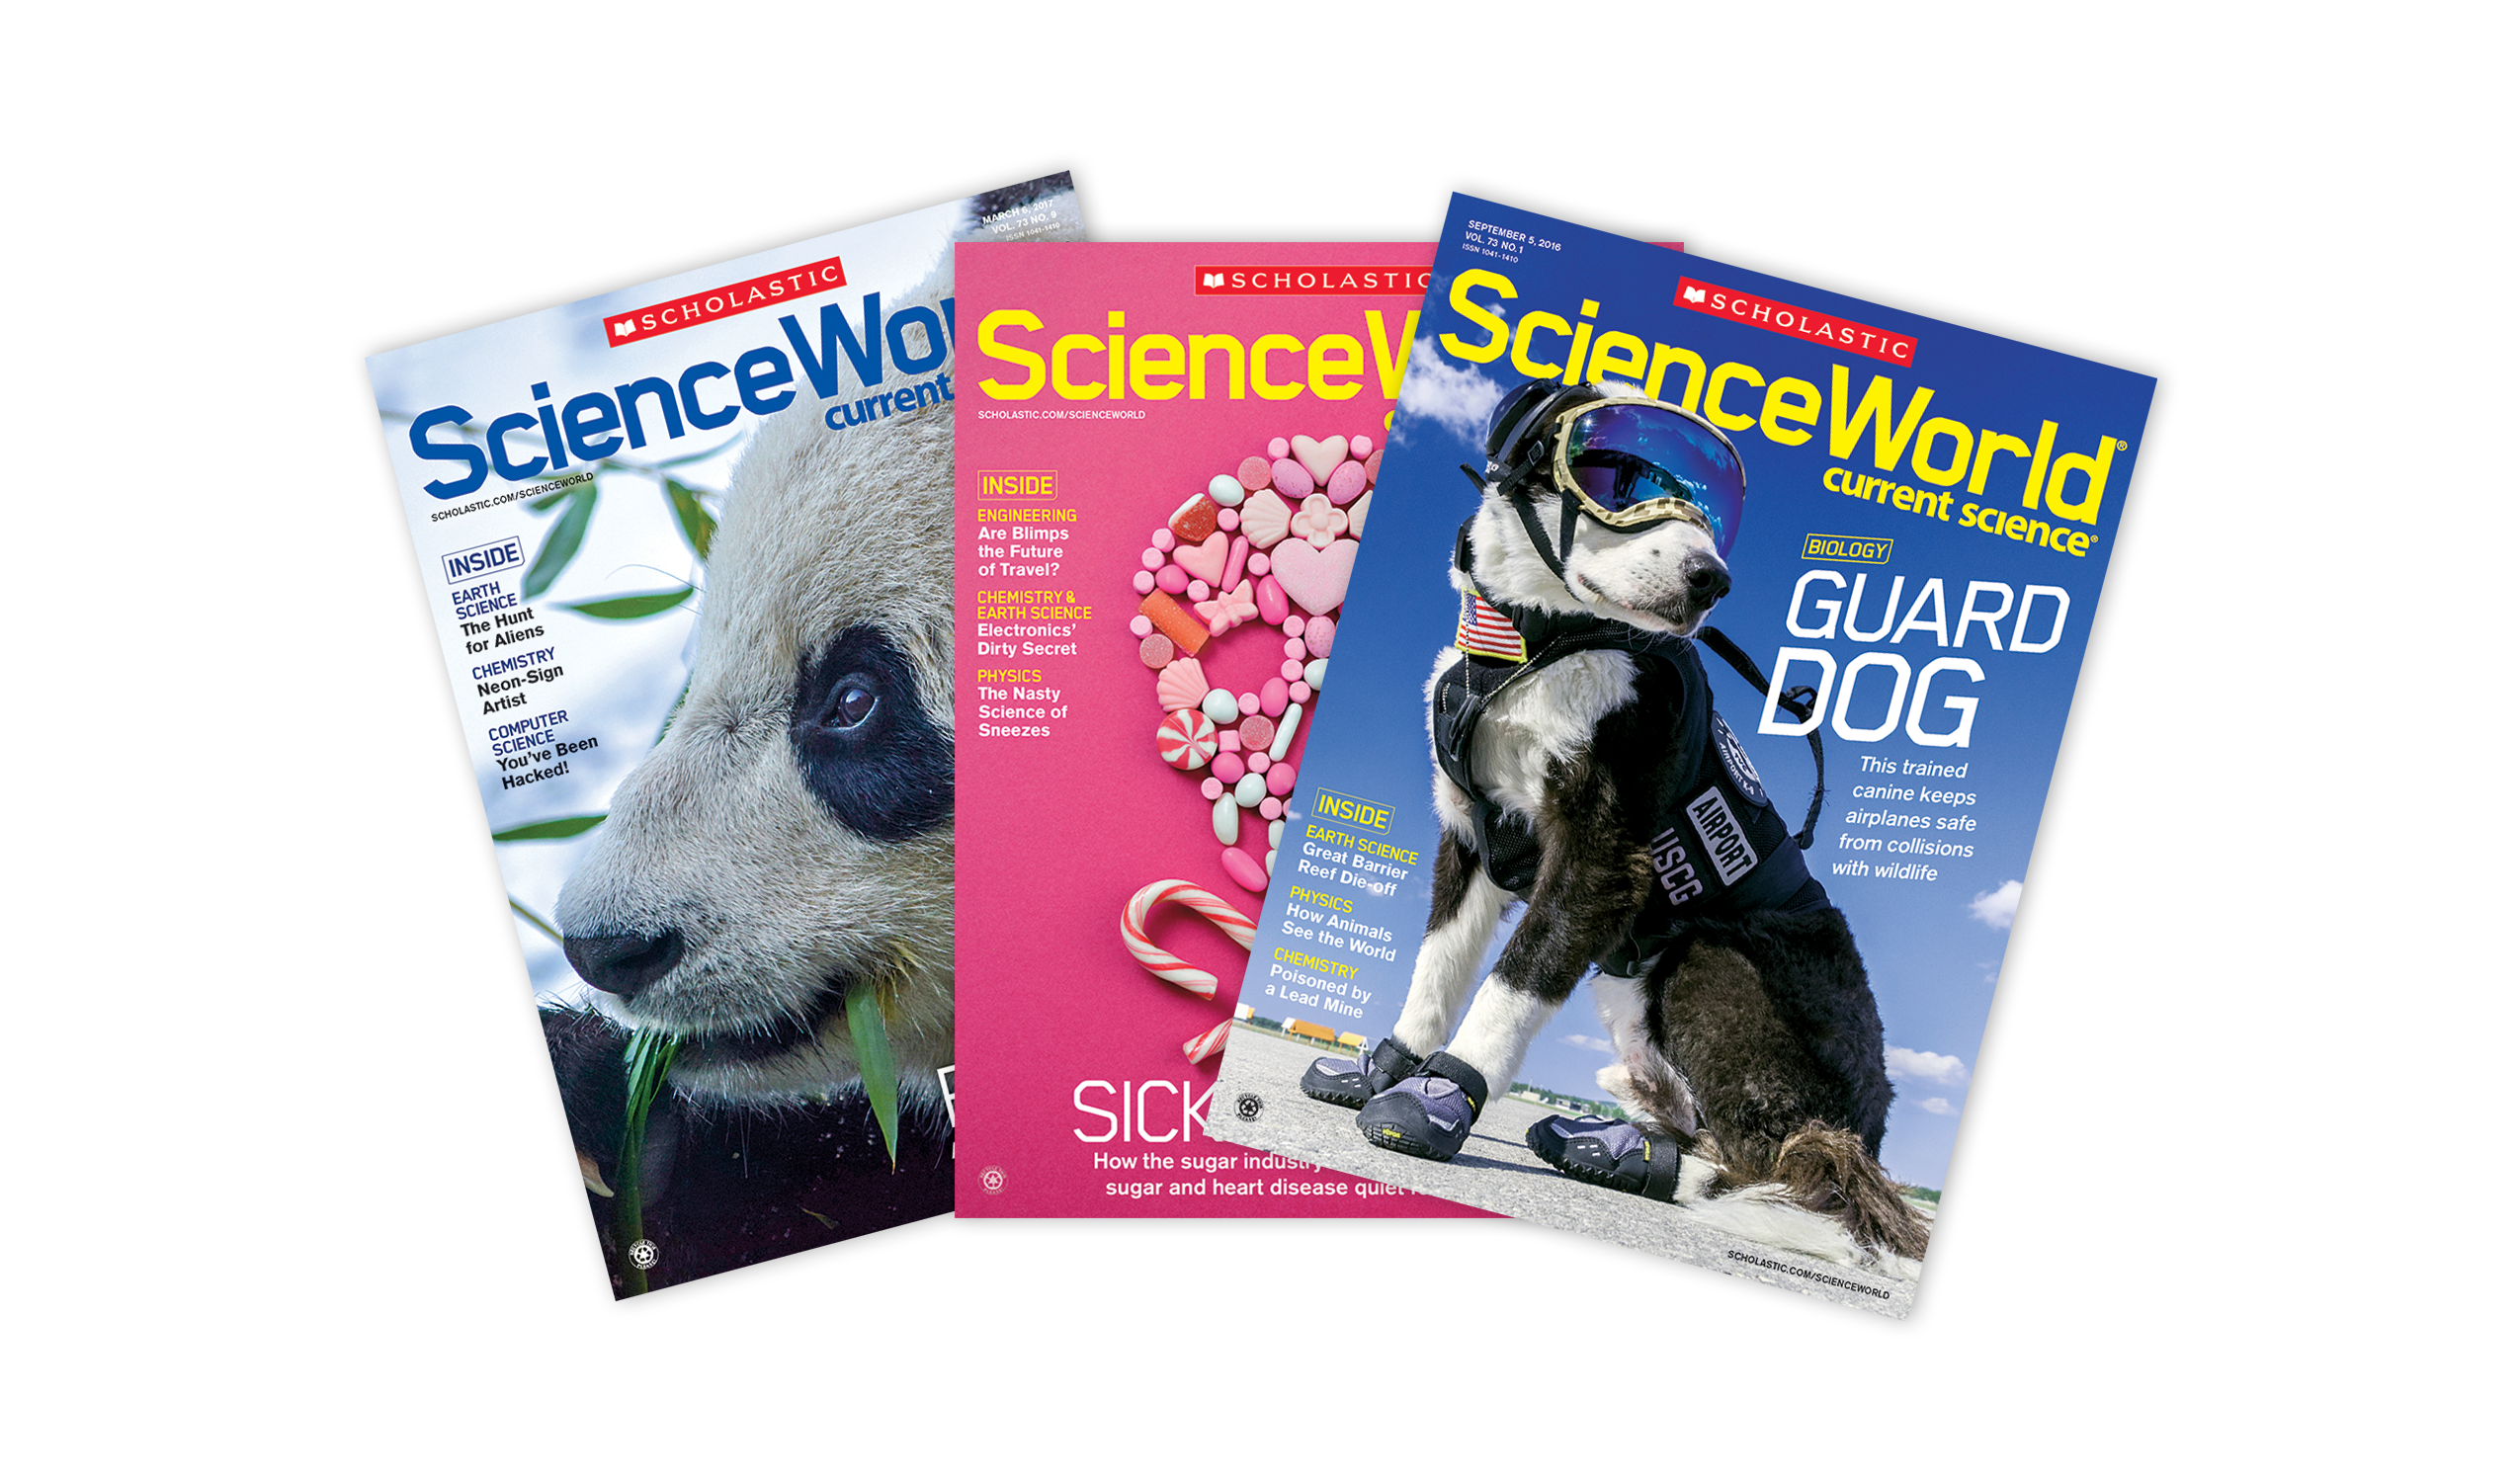 Science World magazine issues